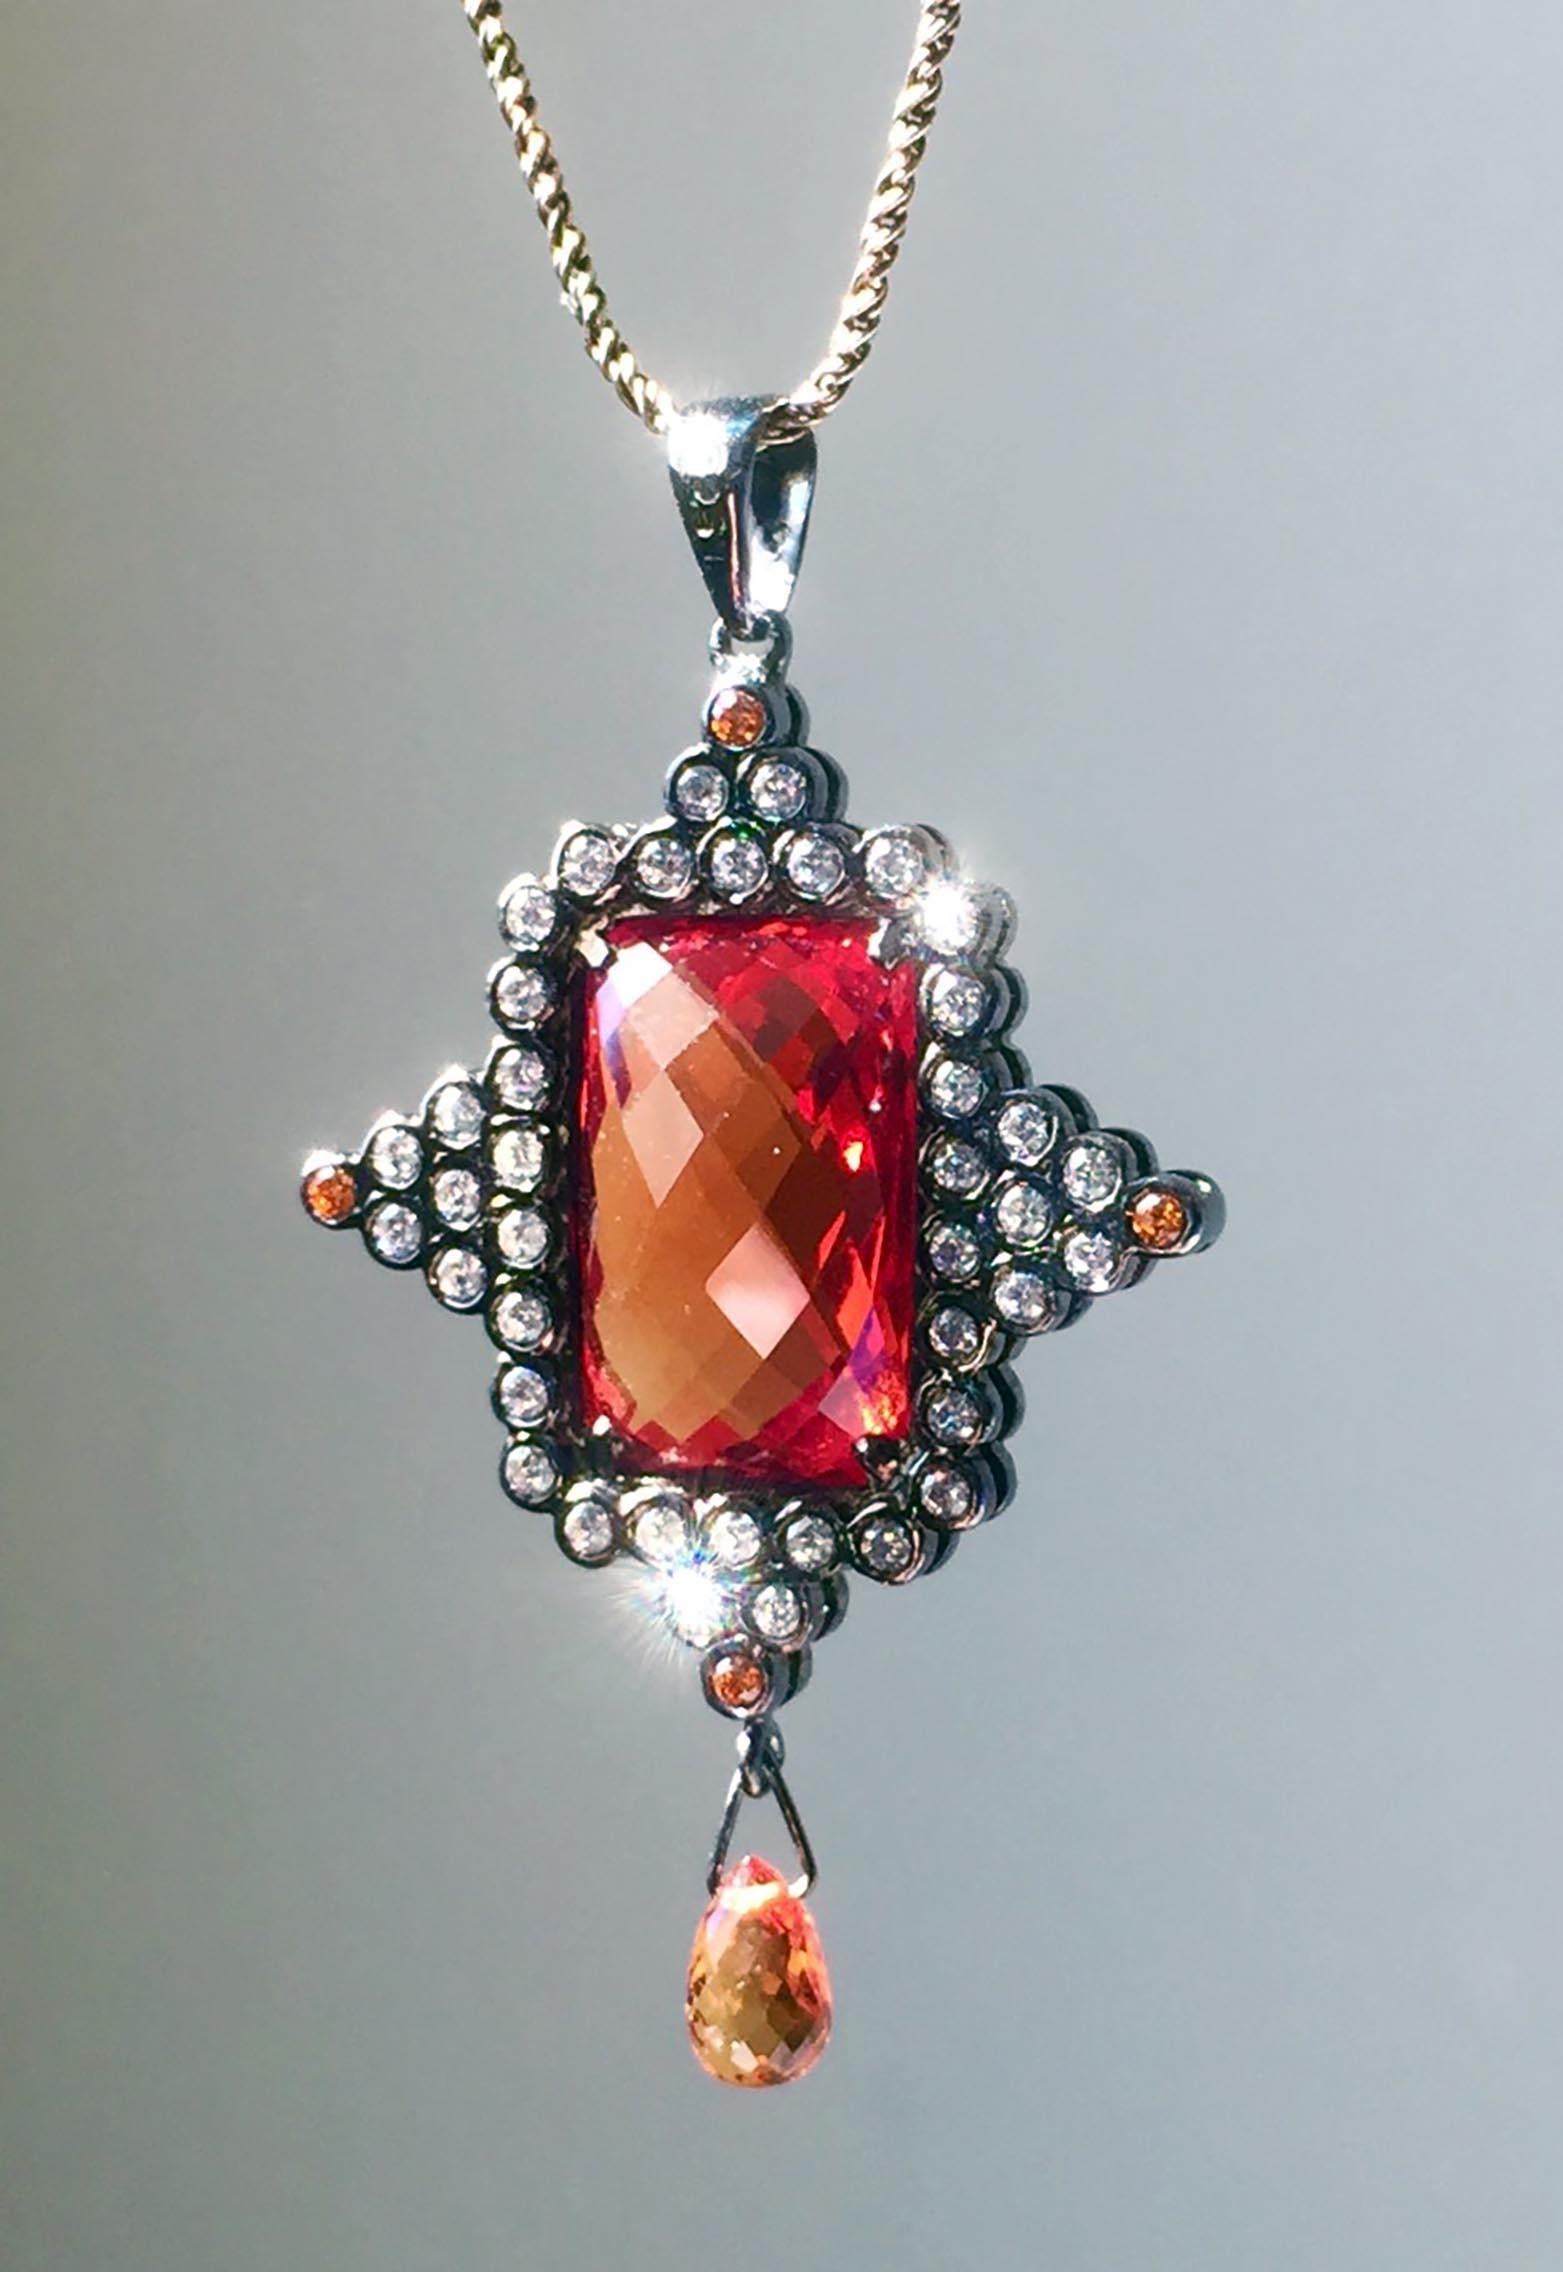 A Lovely Two Sided Sapphire Pendant is set in Blackened Silver and Features a Pillow/Checkerboard Cut Cultured Orange Sapphire of 13.8 Carats 16mm x 10mm x 6MM.Accented by another 5.8 Carats, 76 Pieces of Cultured White Sapphire Rounds and 8 Orange